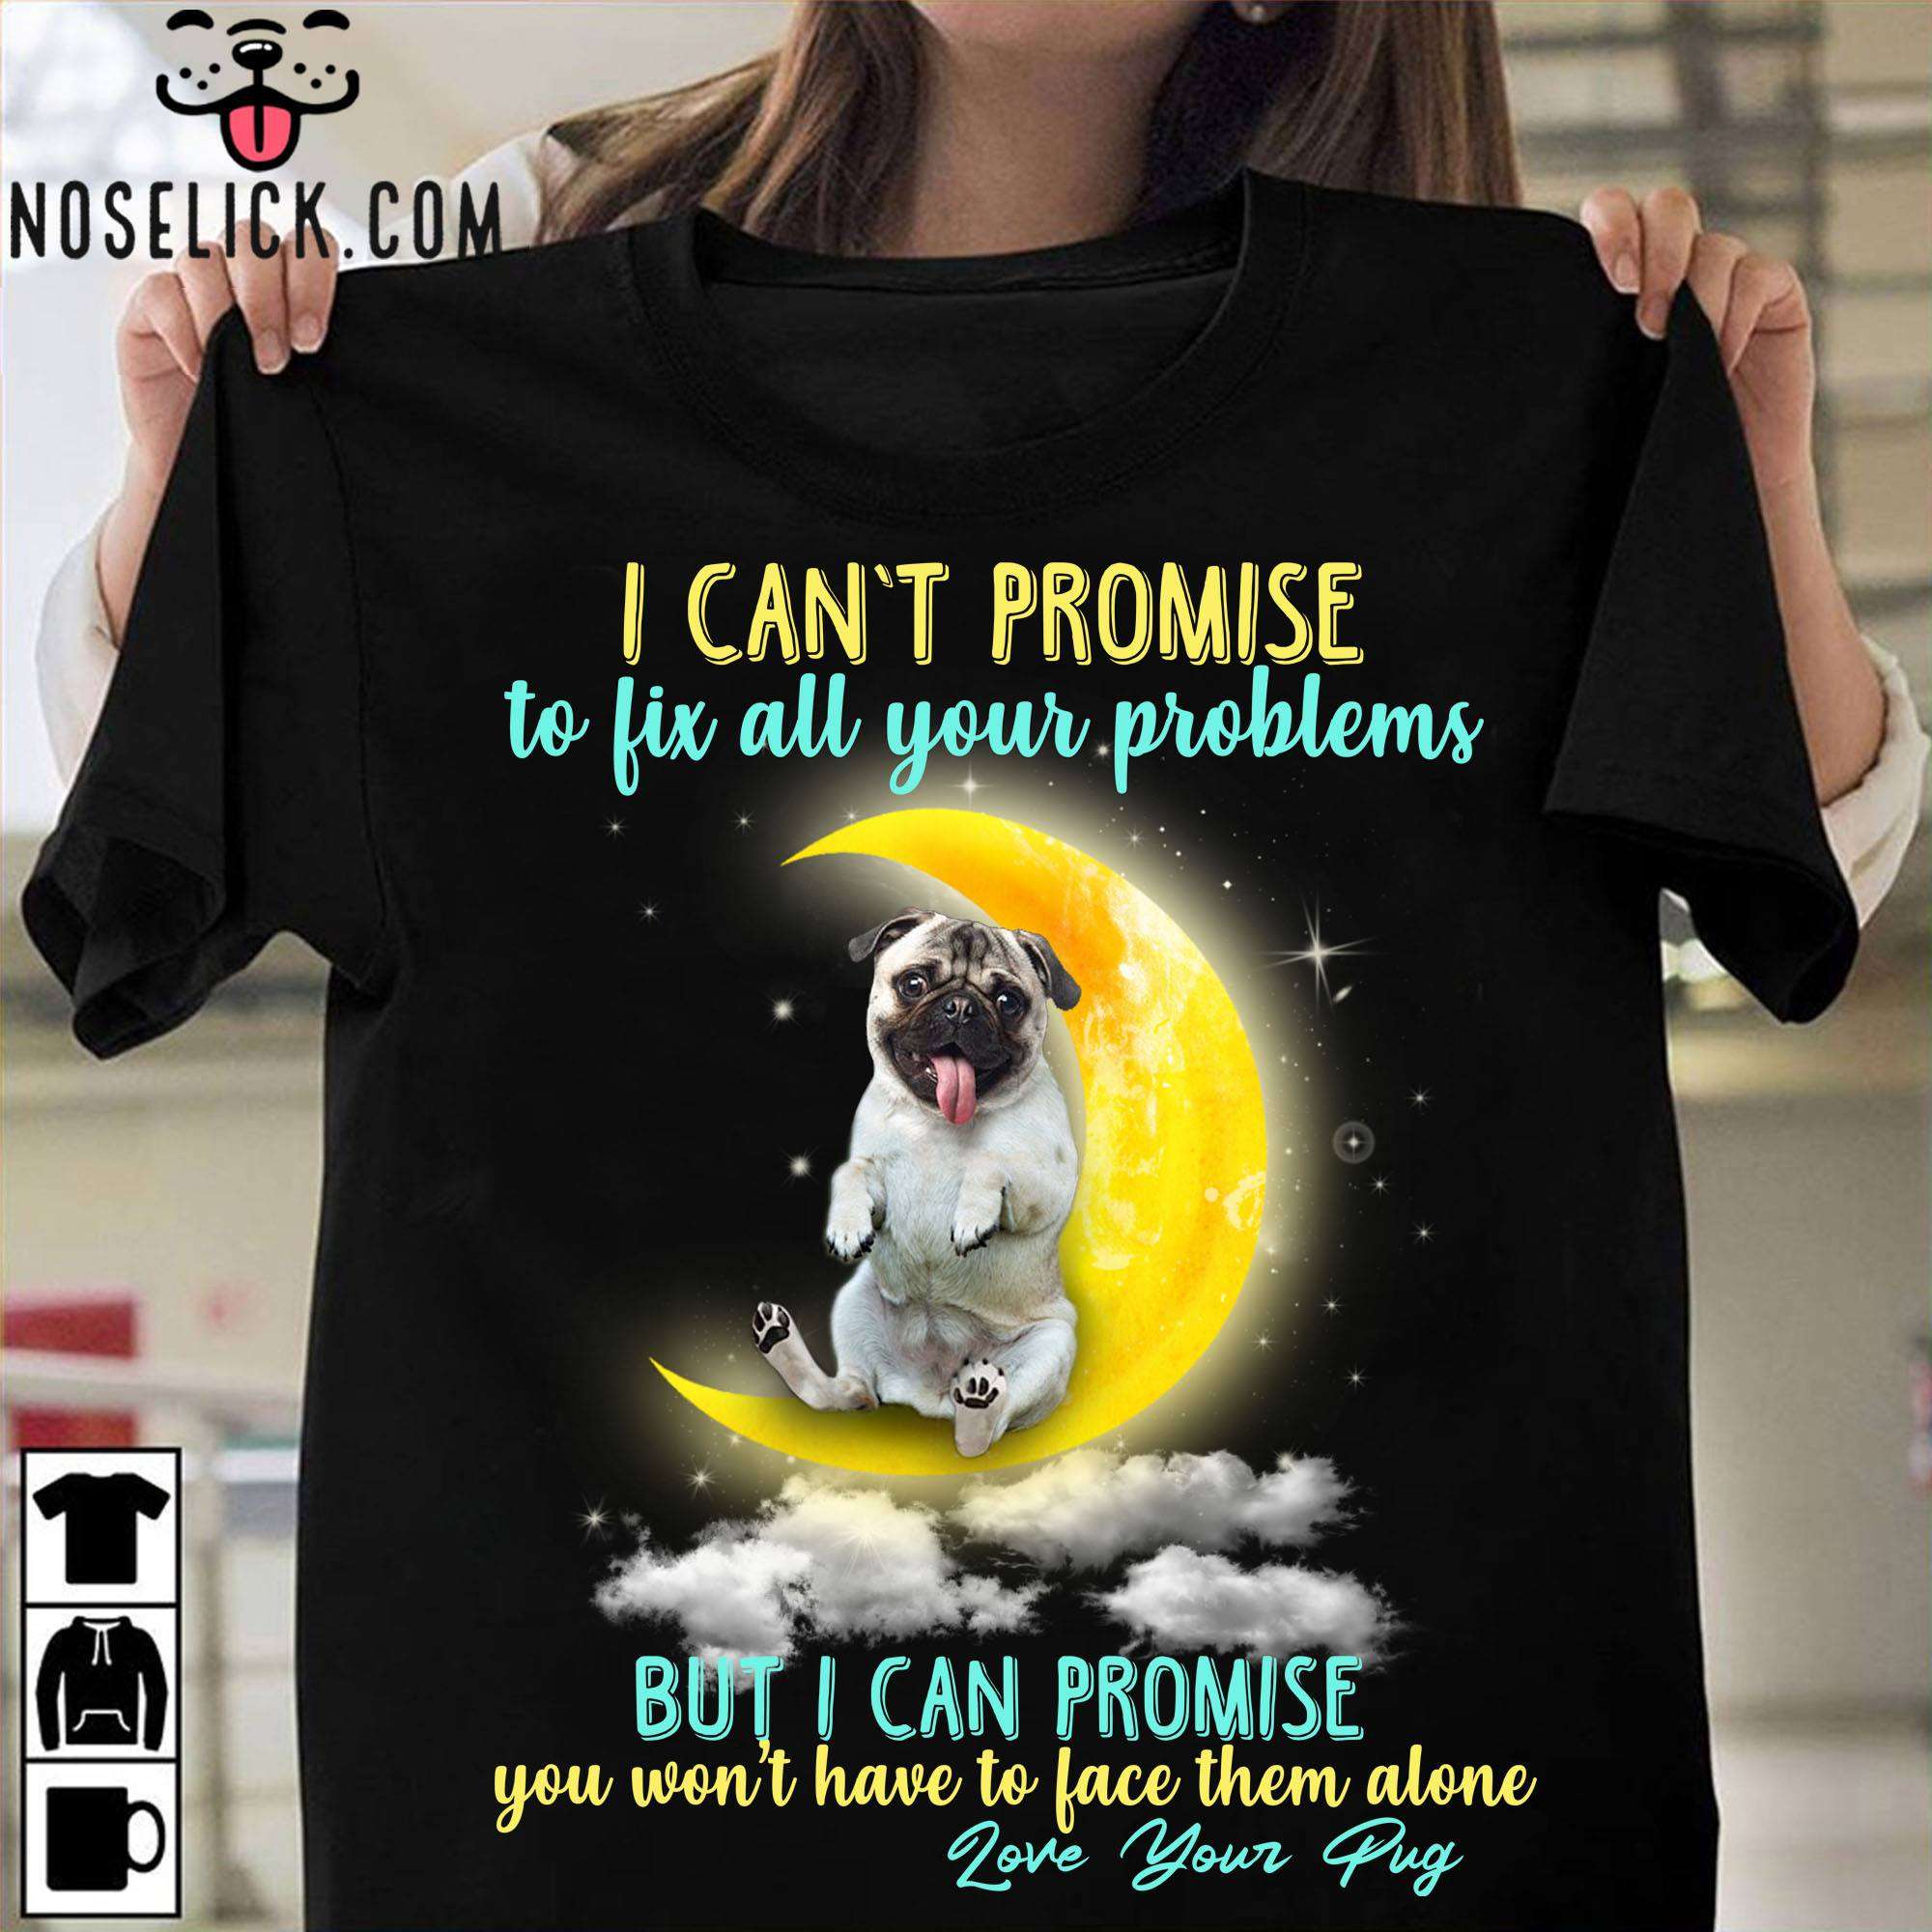 The Moon Pug - I can't promise to fix all your problems but i can promise you won't have to face them alone love your pug